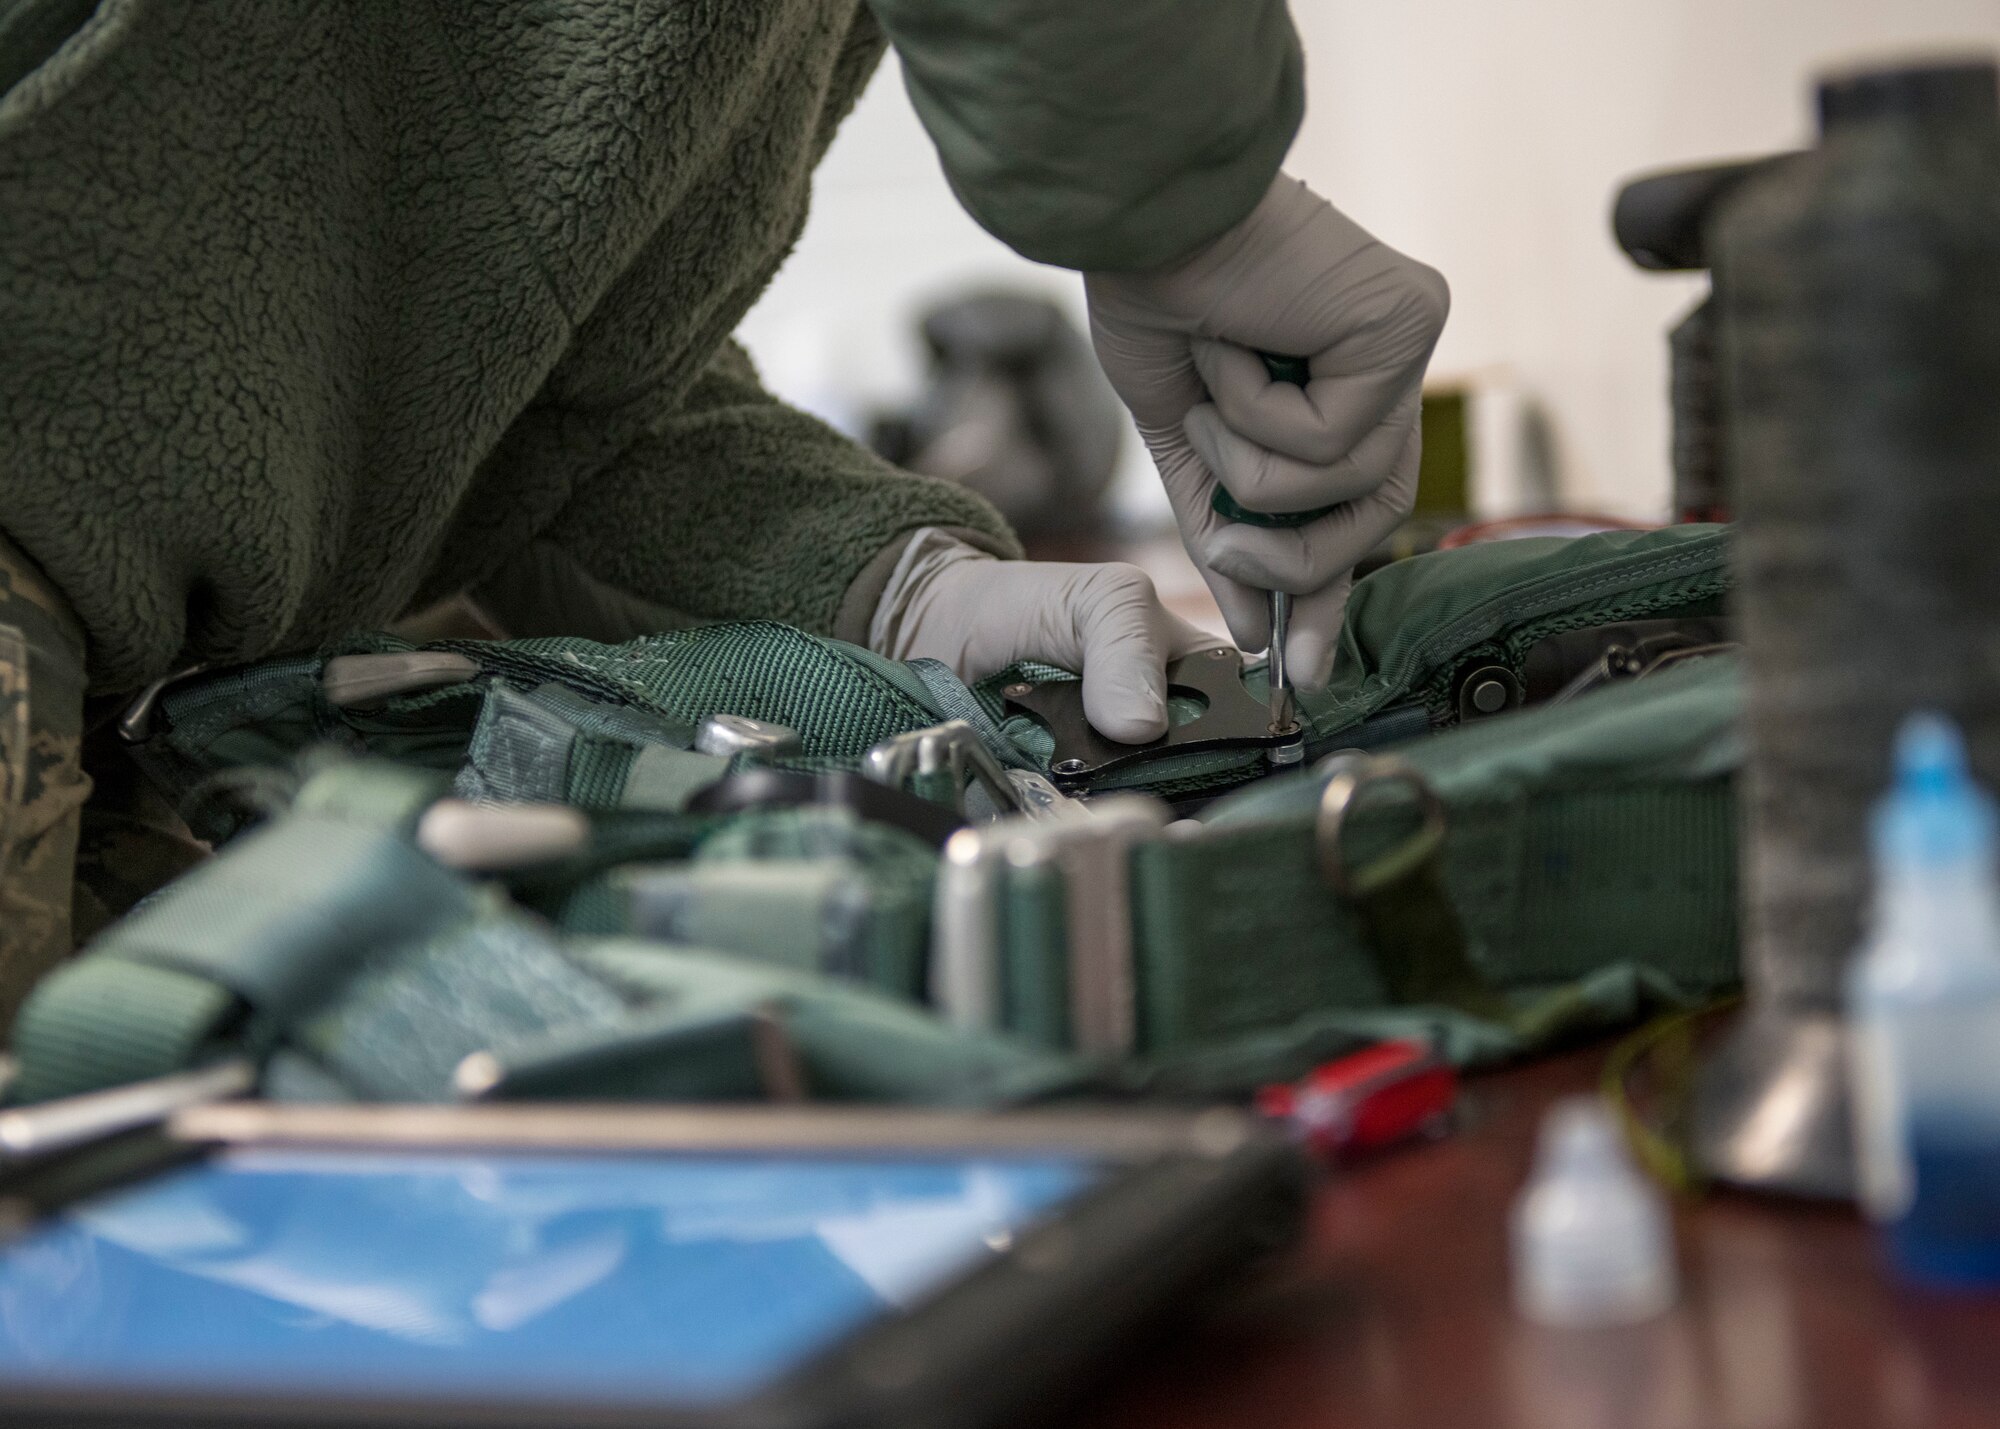 U.S. Air Force Airman Samantha Anderson, 54th Operations Support Squadron Aircrew Flight Equipment apprentice, tightens a screw on a pair of anti-gravity trousers, April 11, 2019, at Naval Air Station Joint Reserve Base New Orleans, La. Because of the gravitational forces the body experiences during a flight in a fighter jet, a special set of trousers, also called the 'G-suit,' must be fit and worn to regulate oxygen levels in the body. (U.S. Air Force photo by Airman 1st Class Kindra Stewart)